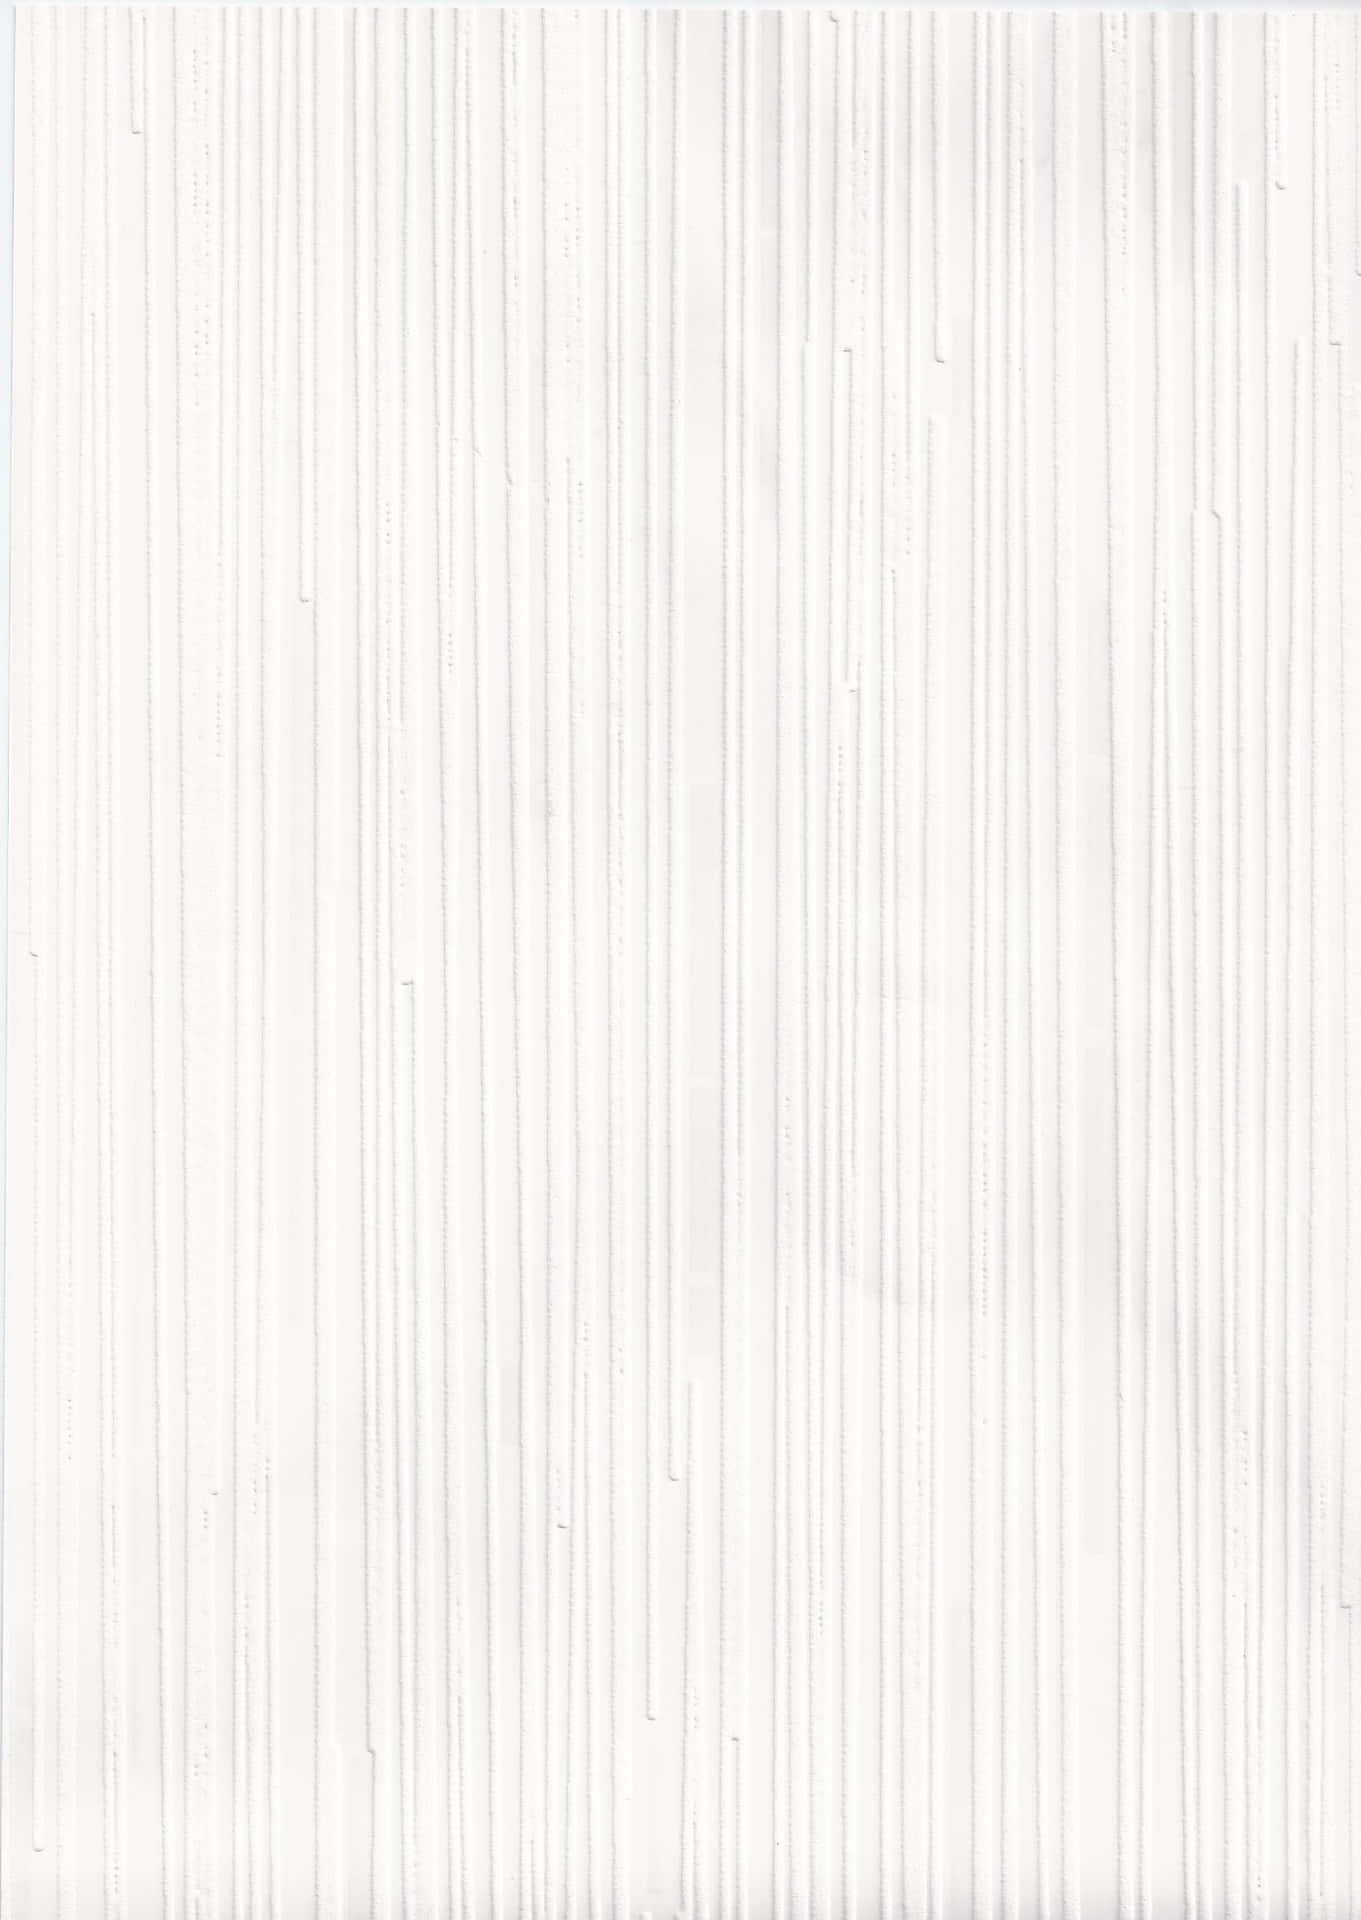 This minimalist white solid background is perfect for almost any application